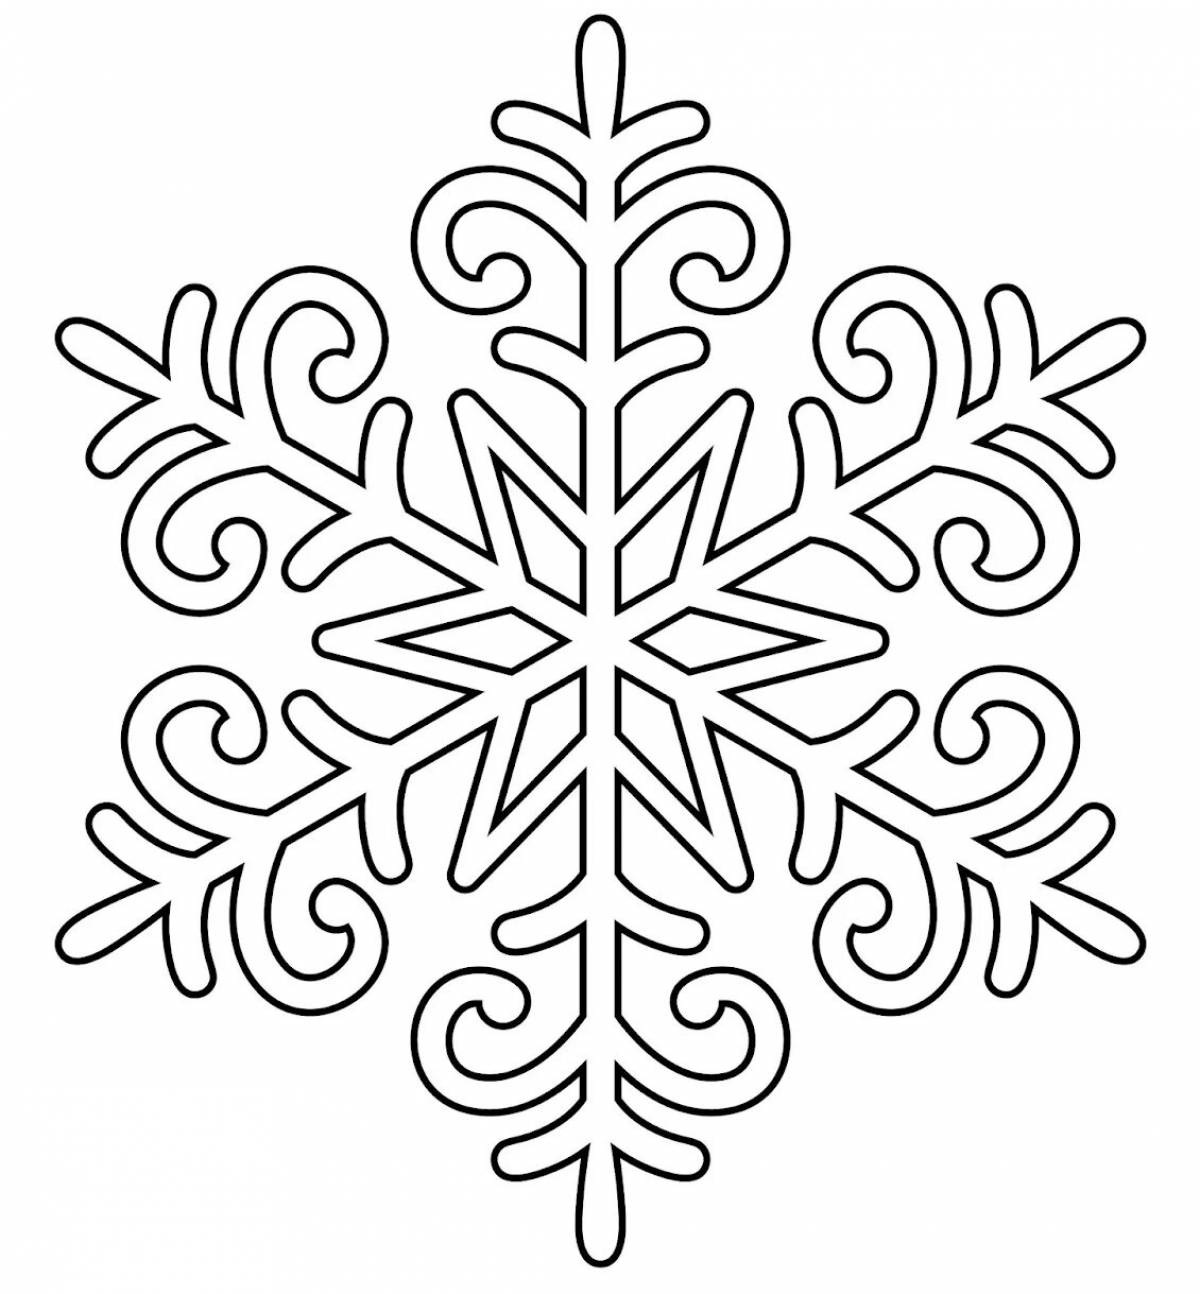 Coloring book unforgettable snowflake